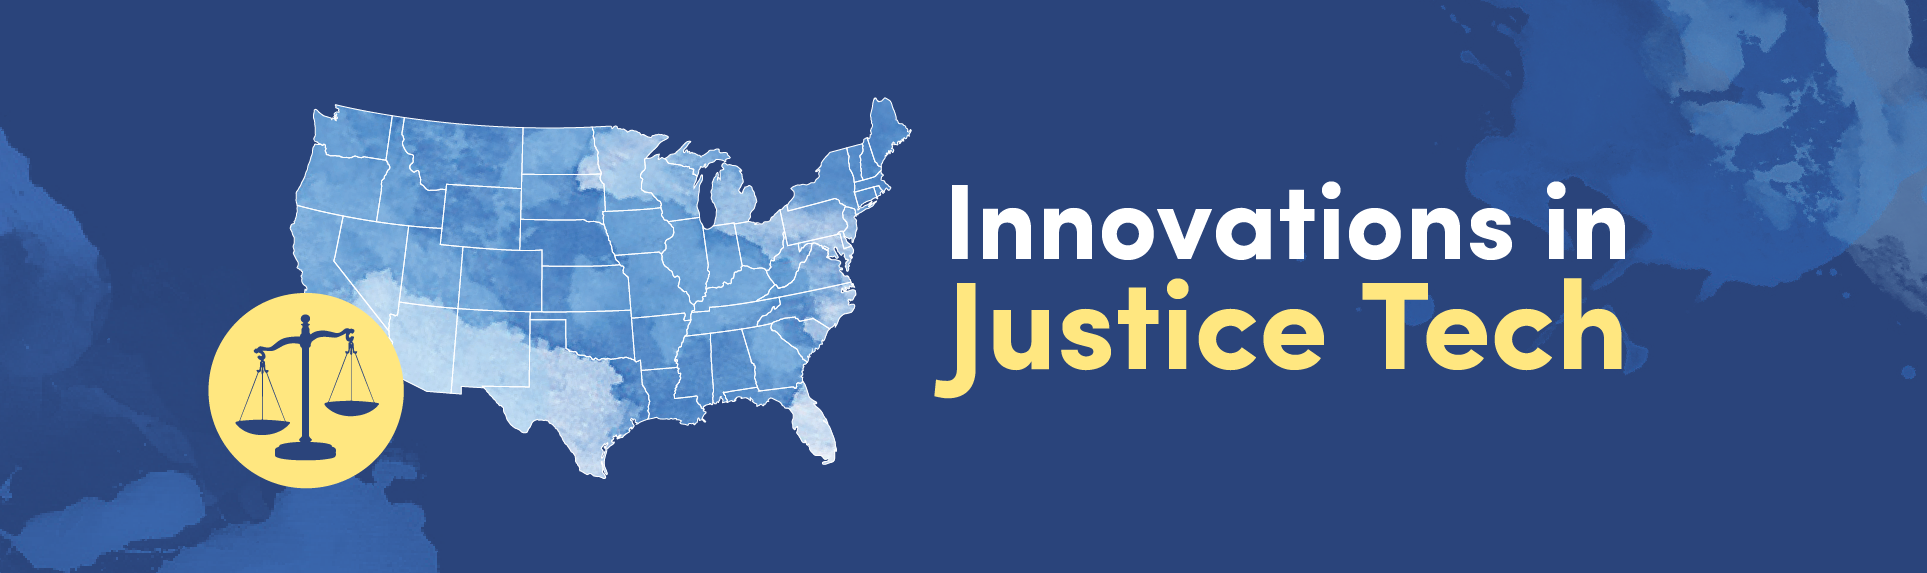 Justice Tech Press Release Banner